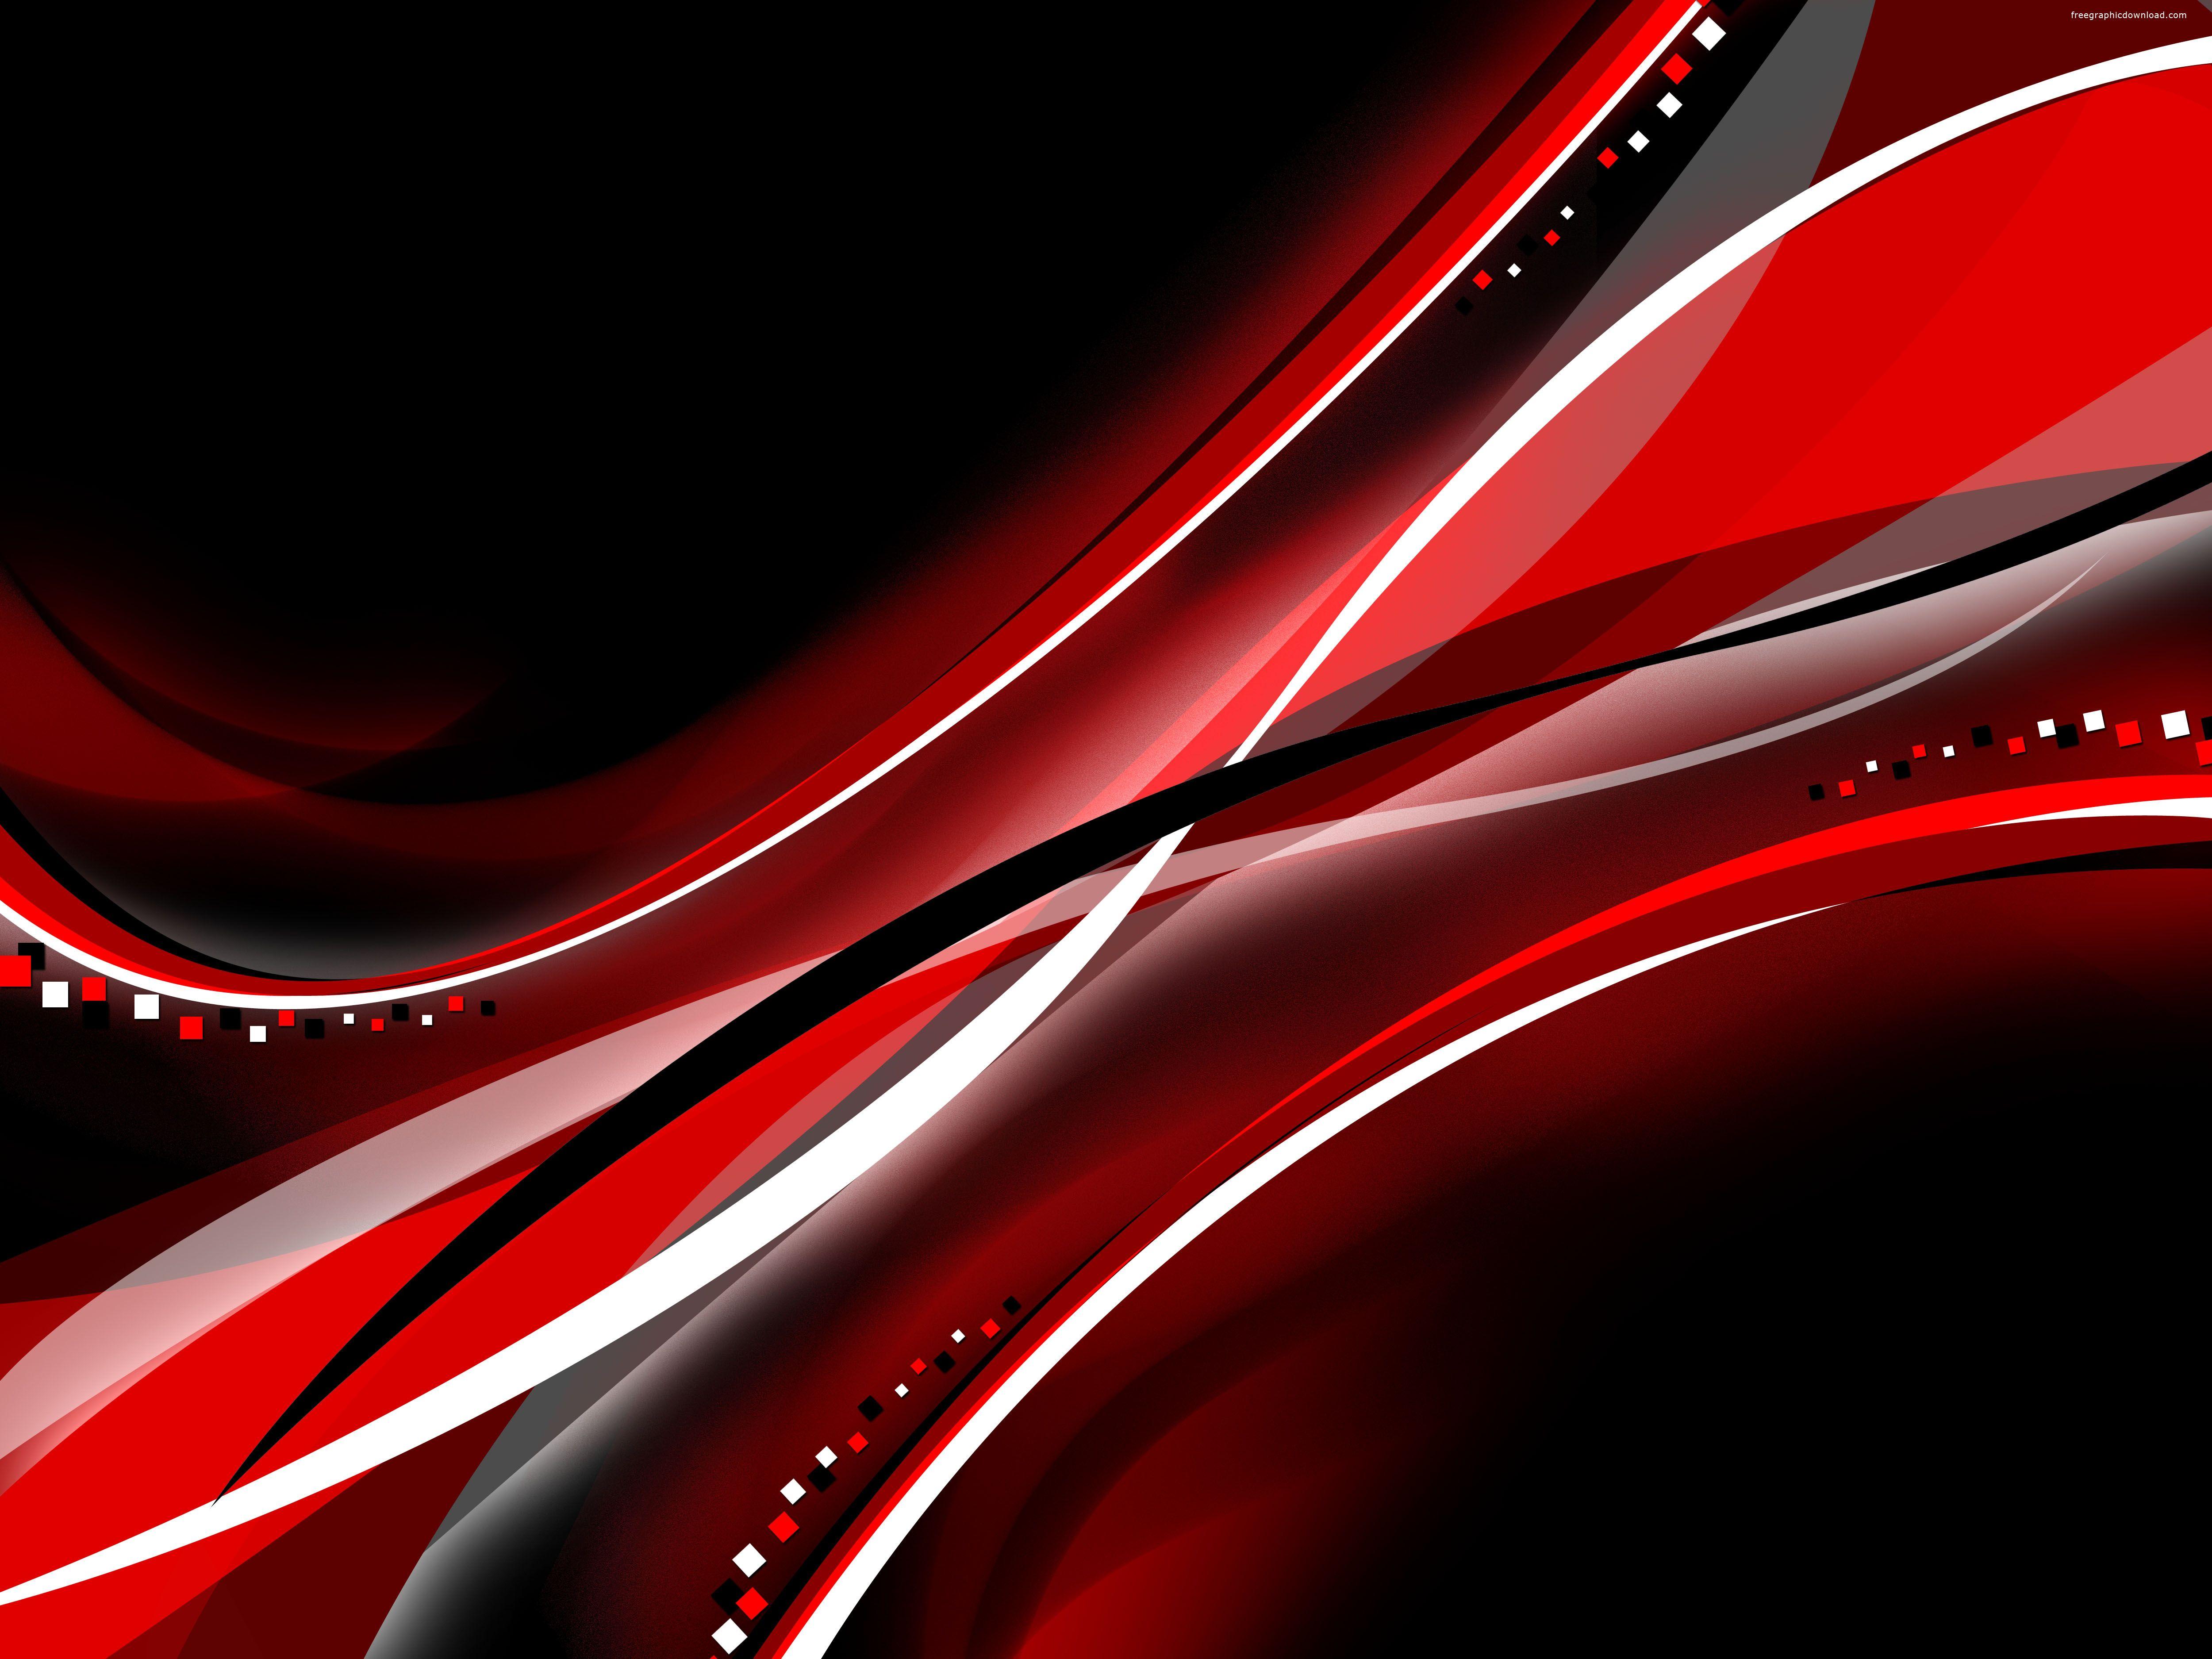 Black and Red Abstract Mobile Wallpaper. Black phone wallpaper, Red wallpaper, Abstract wallpaper